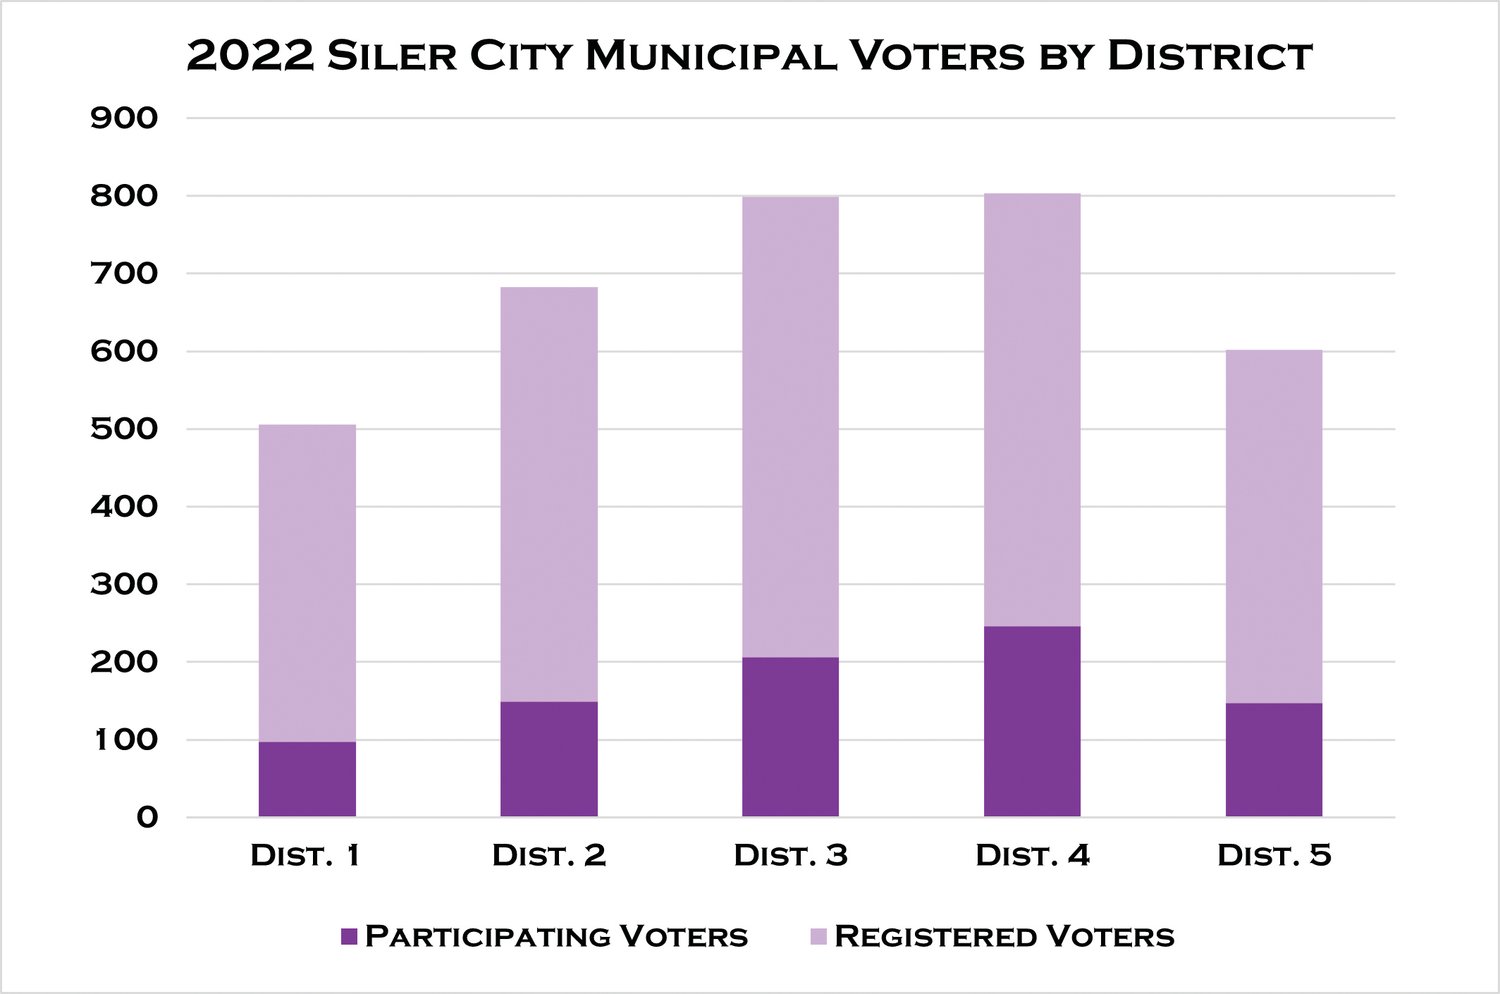 A larger percentage of eligible District 3 and 4 town voters cast ballots in the 2022 municipal elections, even though they could only vote for a mayor and one of two of the town’s at-large commissioners.